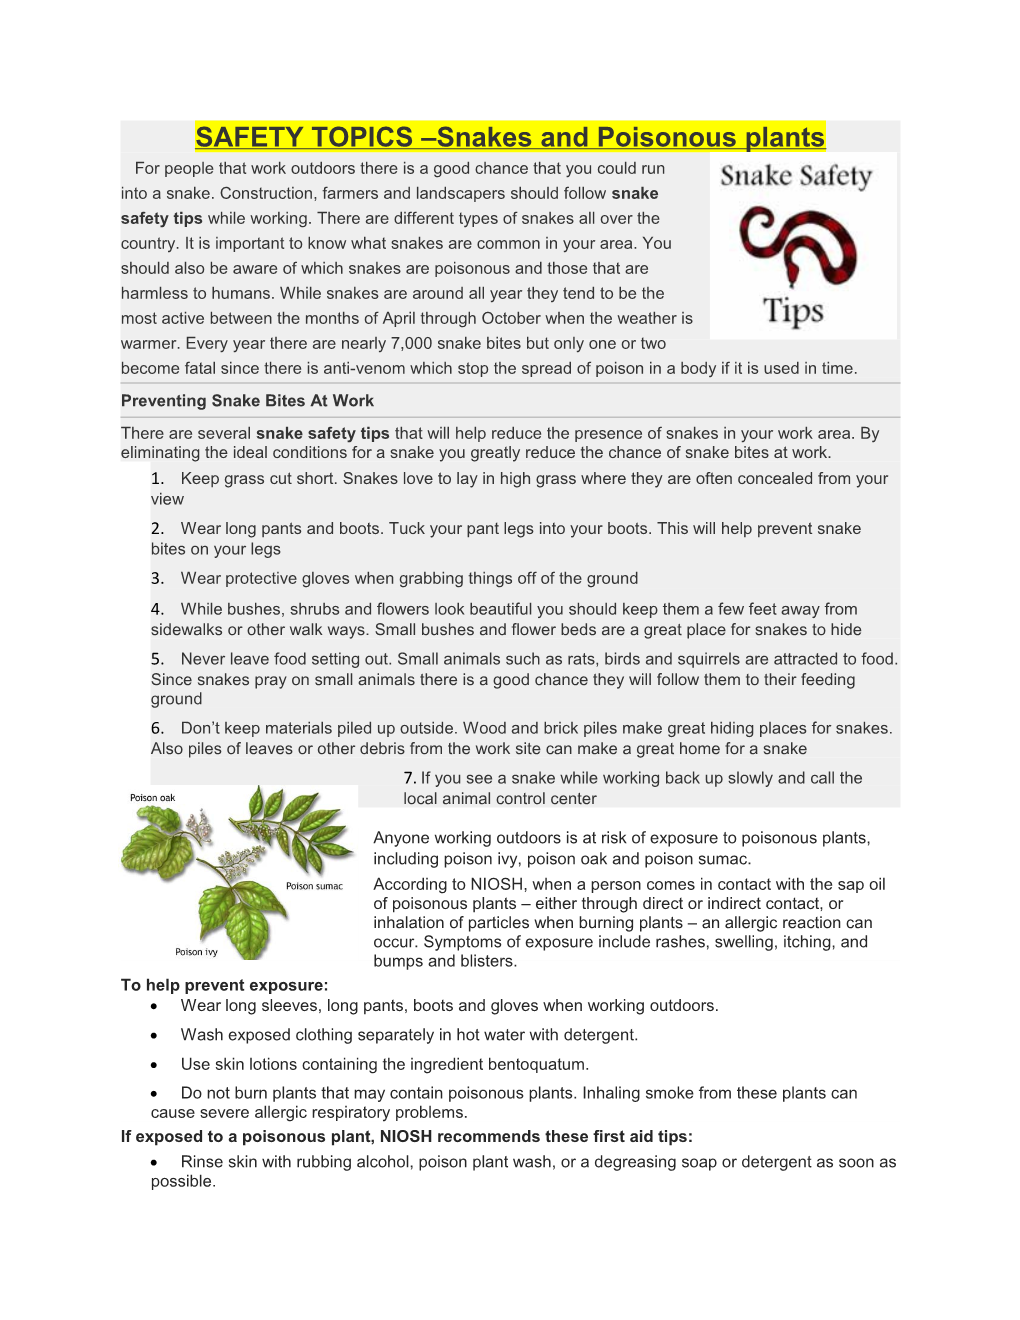 SAFETY TOPICS Snakes and Poisonous Plants